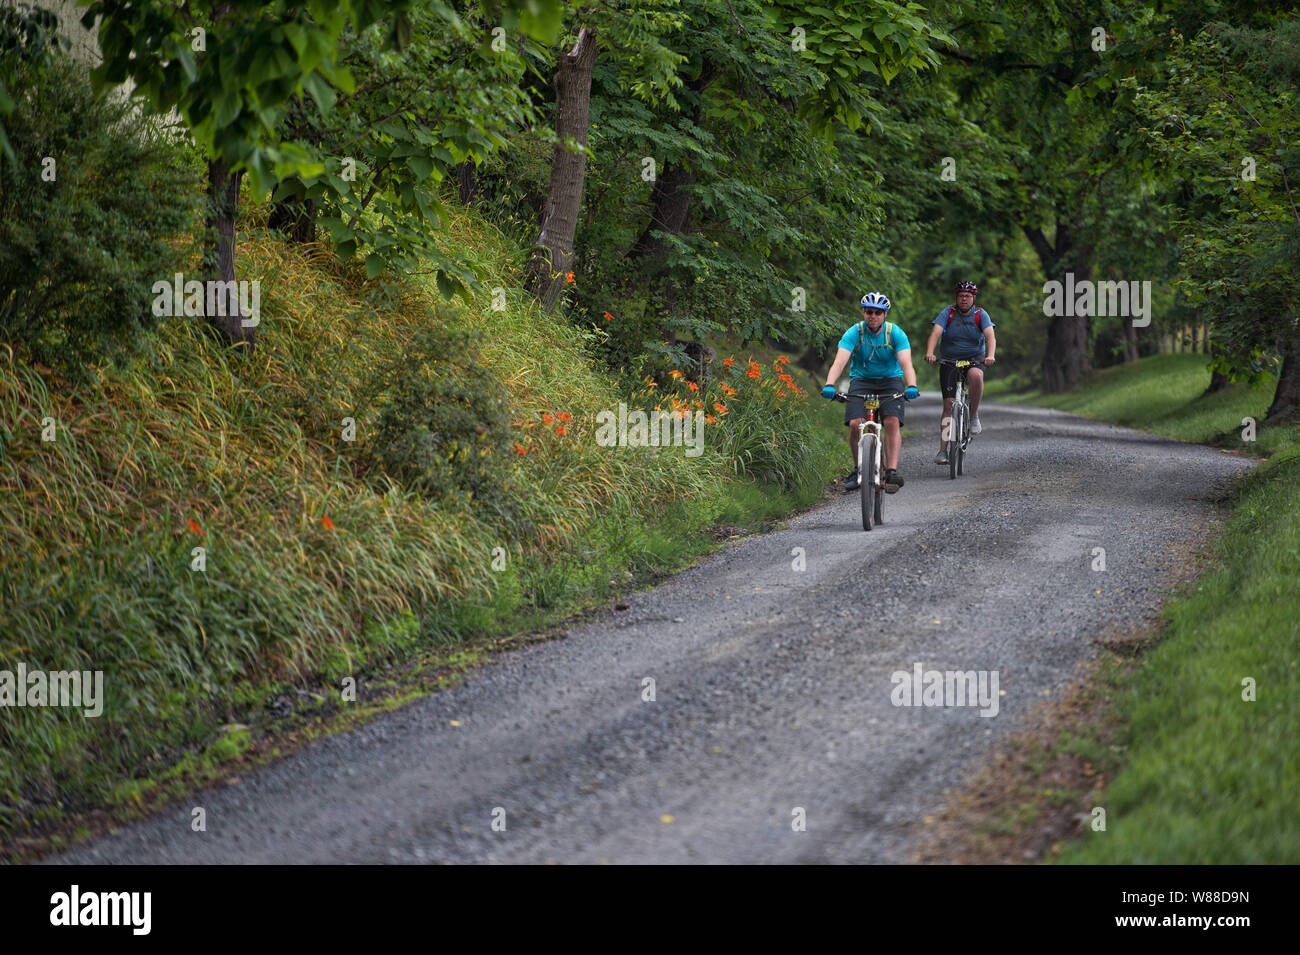 UNITED STATES - June 9, 2019: The Loudoun 1725 Gravel Grinder is a scenic bike ride along historic gravel roads in Northern Virginia.  Located east of Stock Photo